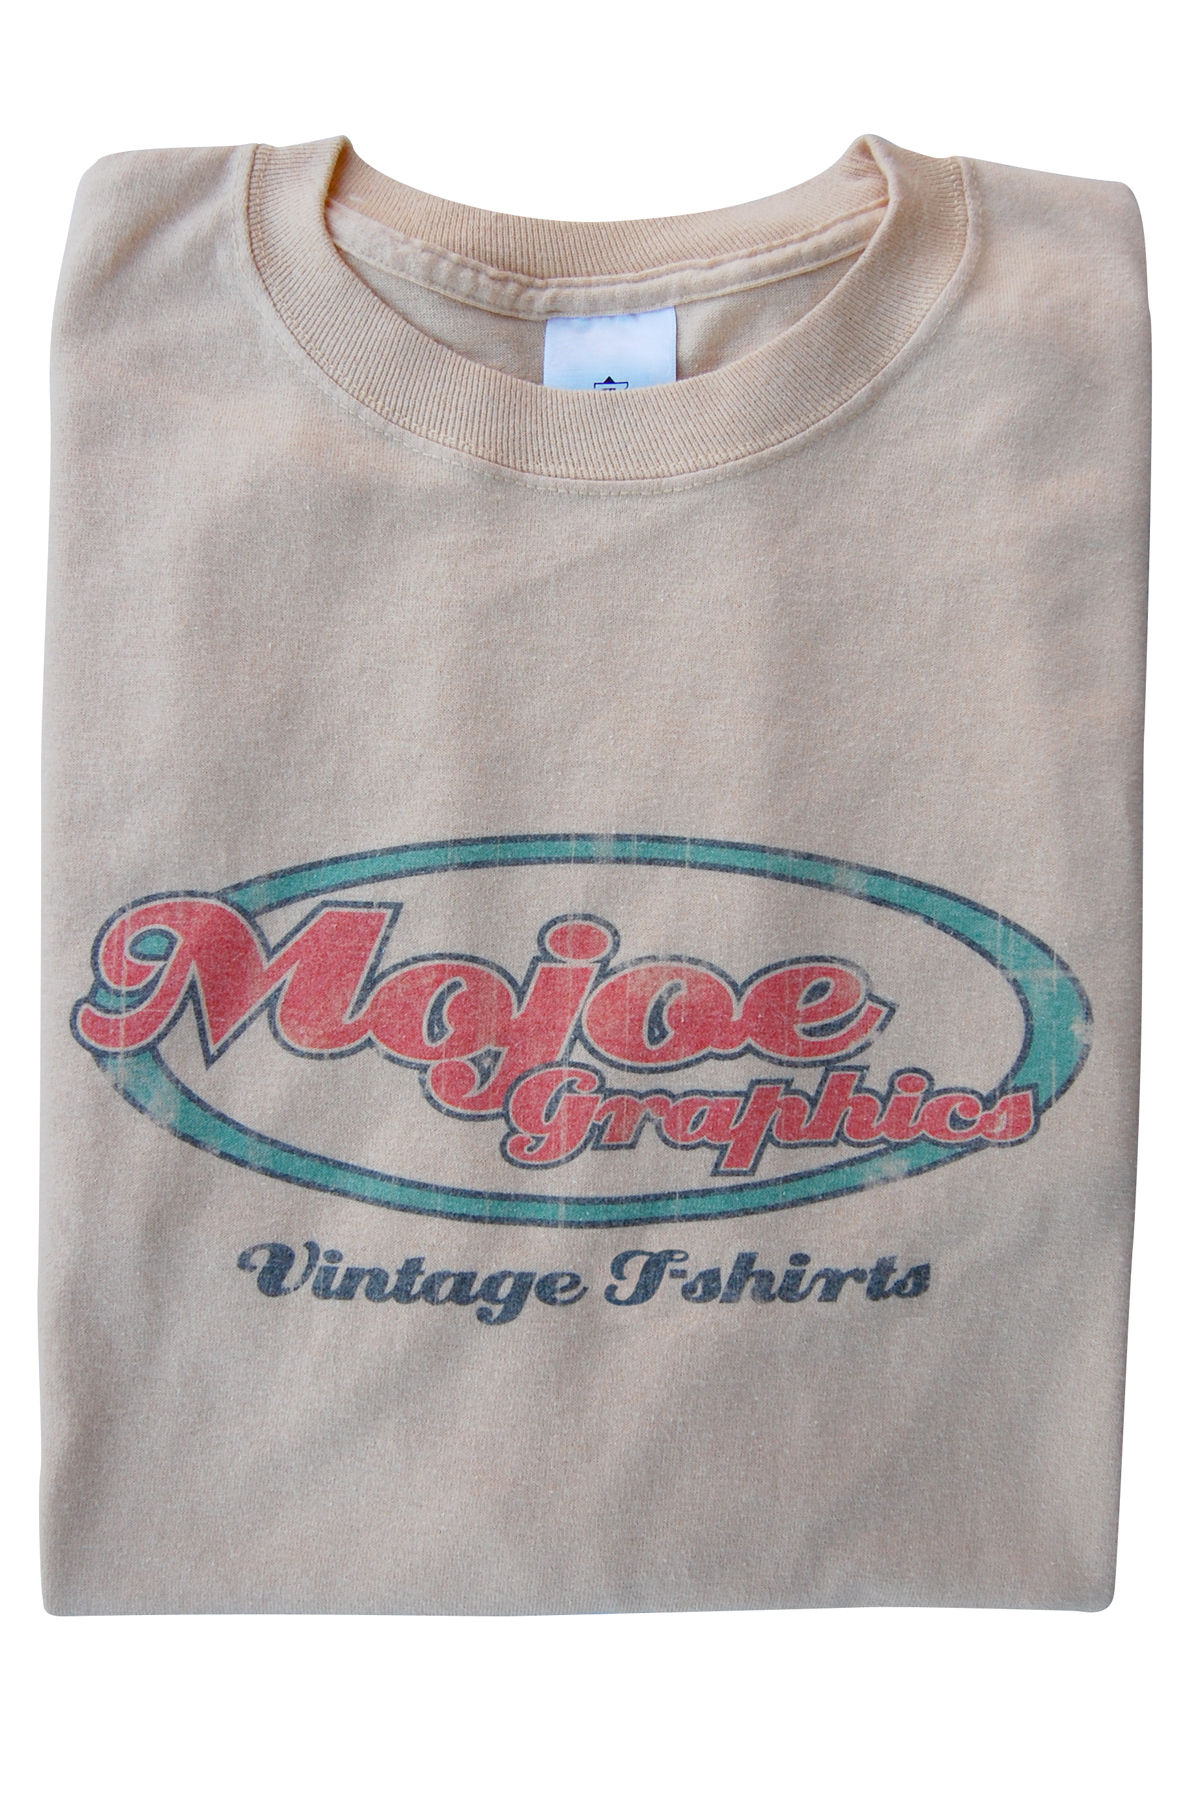 Distressed T-shirt made with sublimation printing